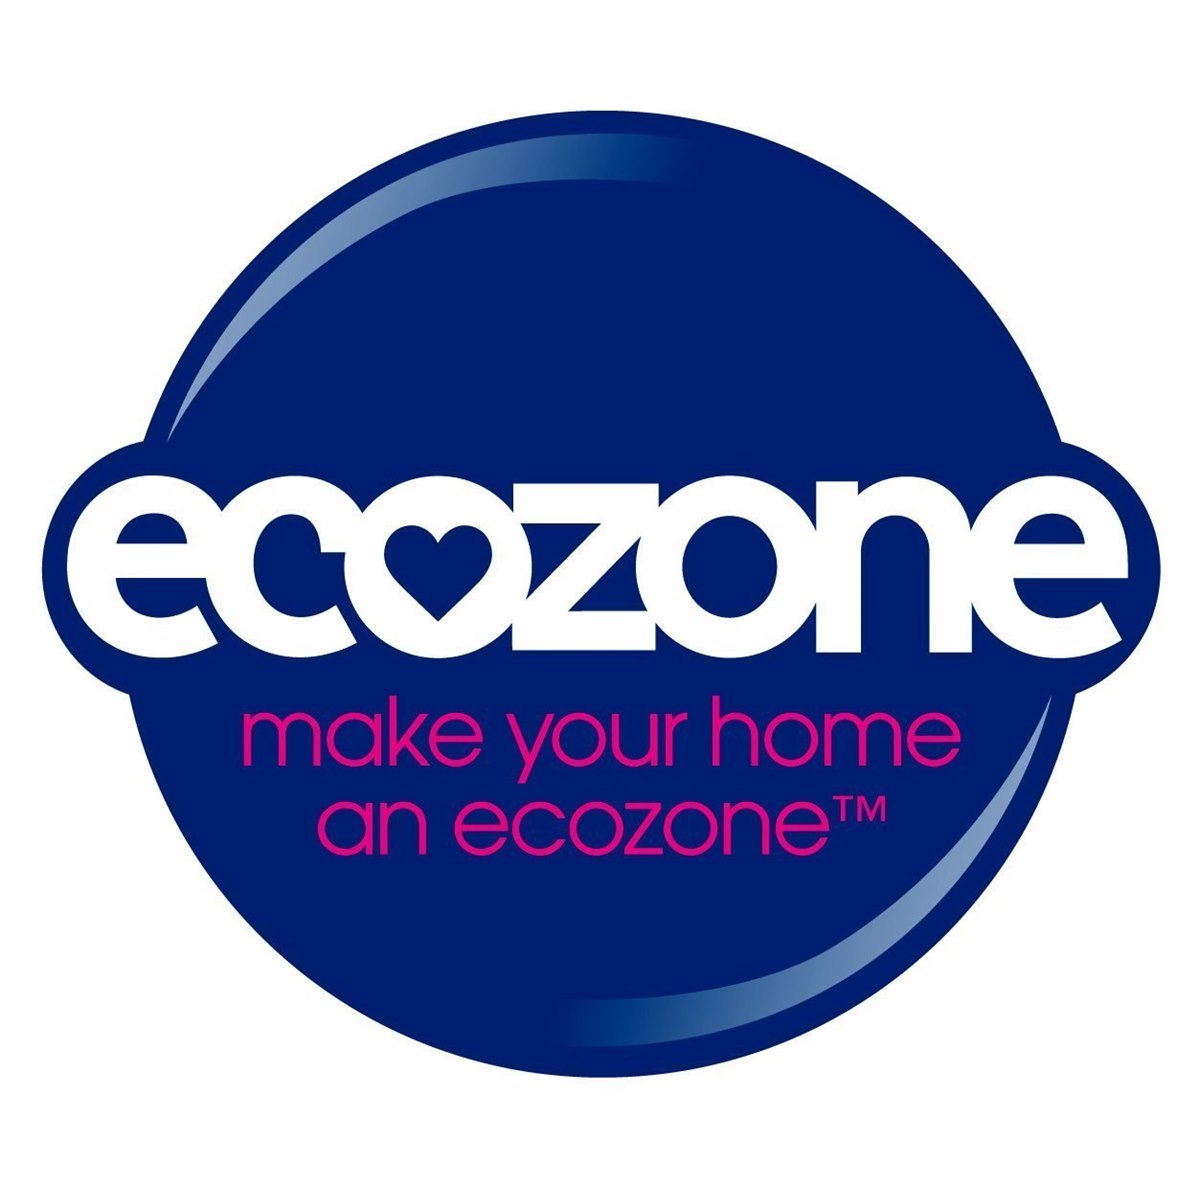 Where to buy Ecozone Products